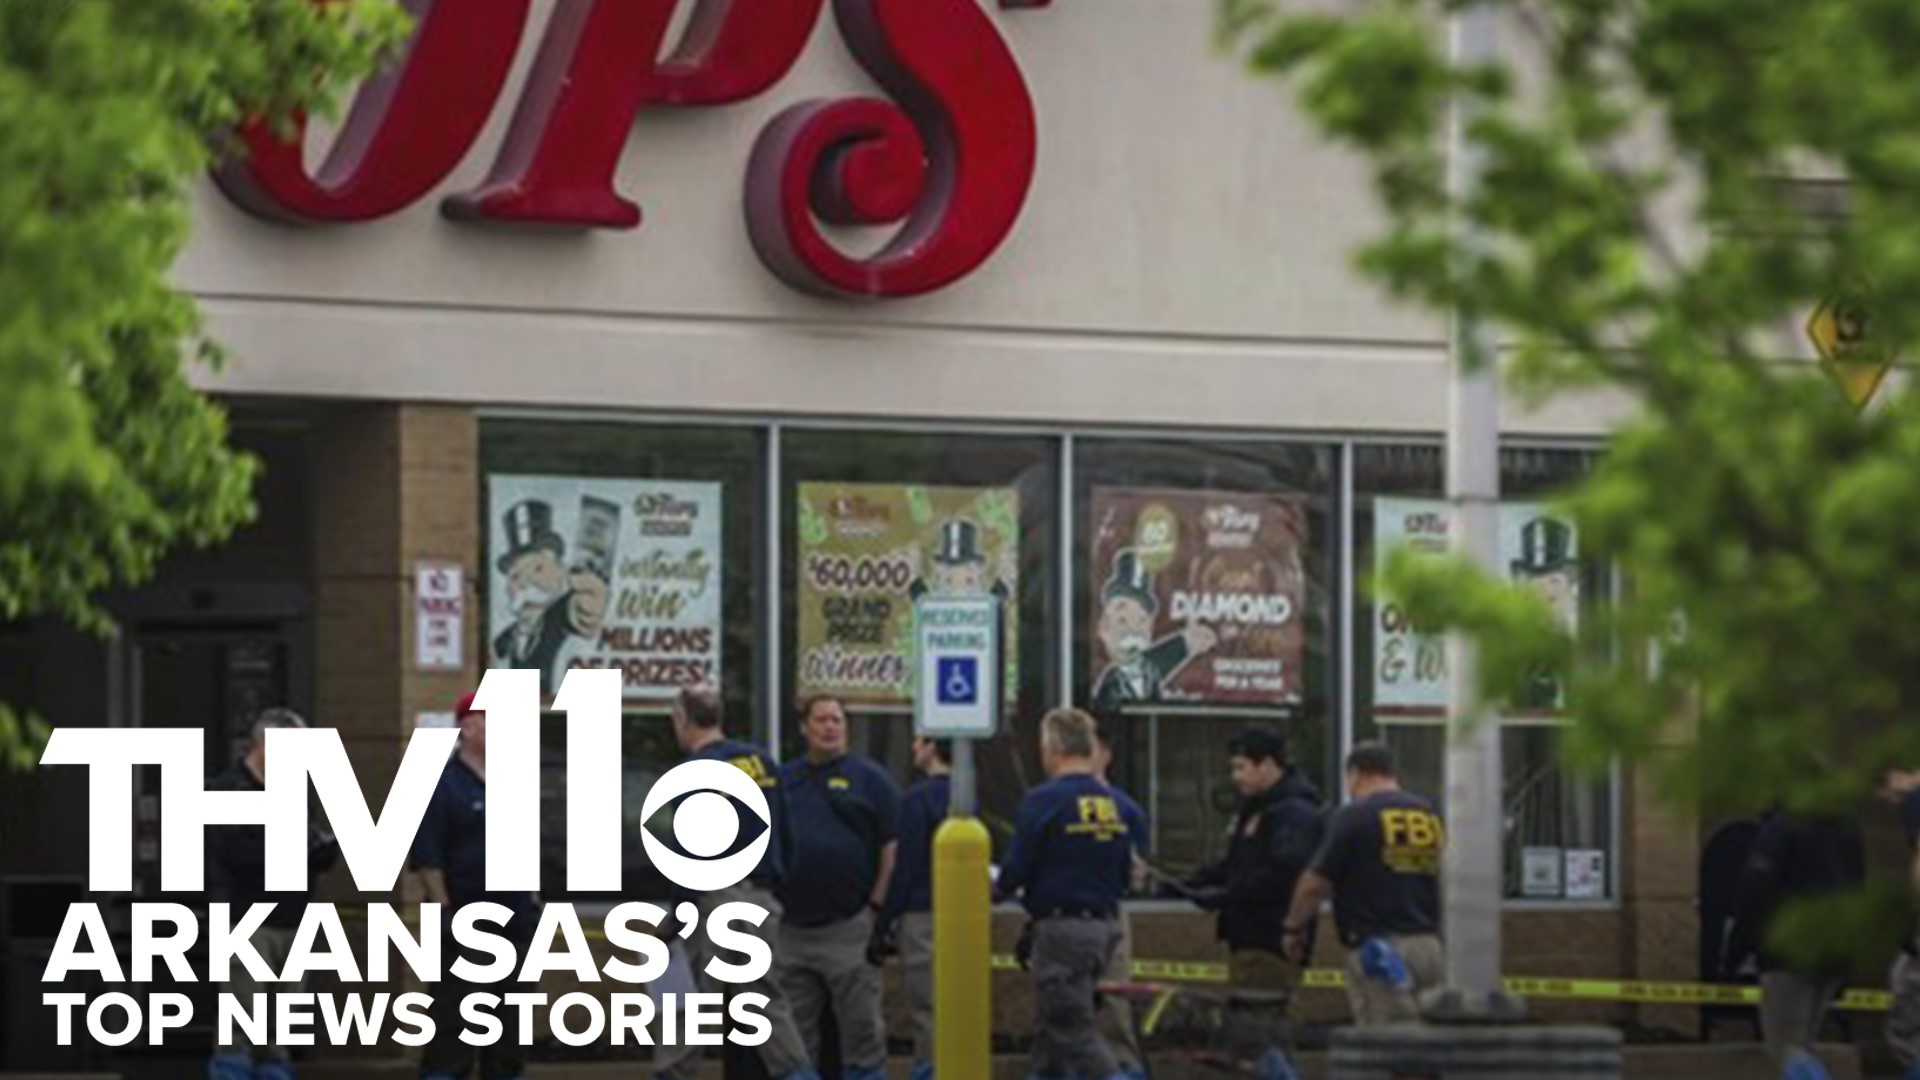 Sarah Horbacewicz provides the top news stories in Arkansas including new details about the deadly mass shooting at a New York supermarket over the weekend.